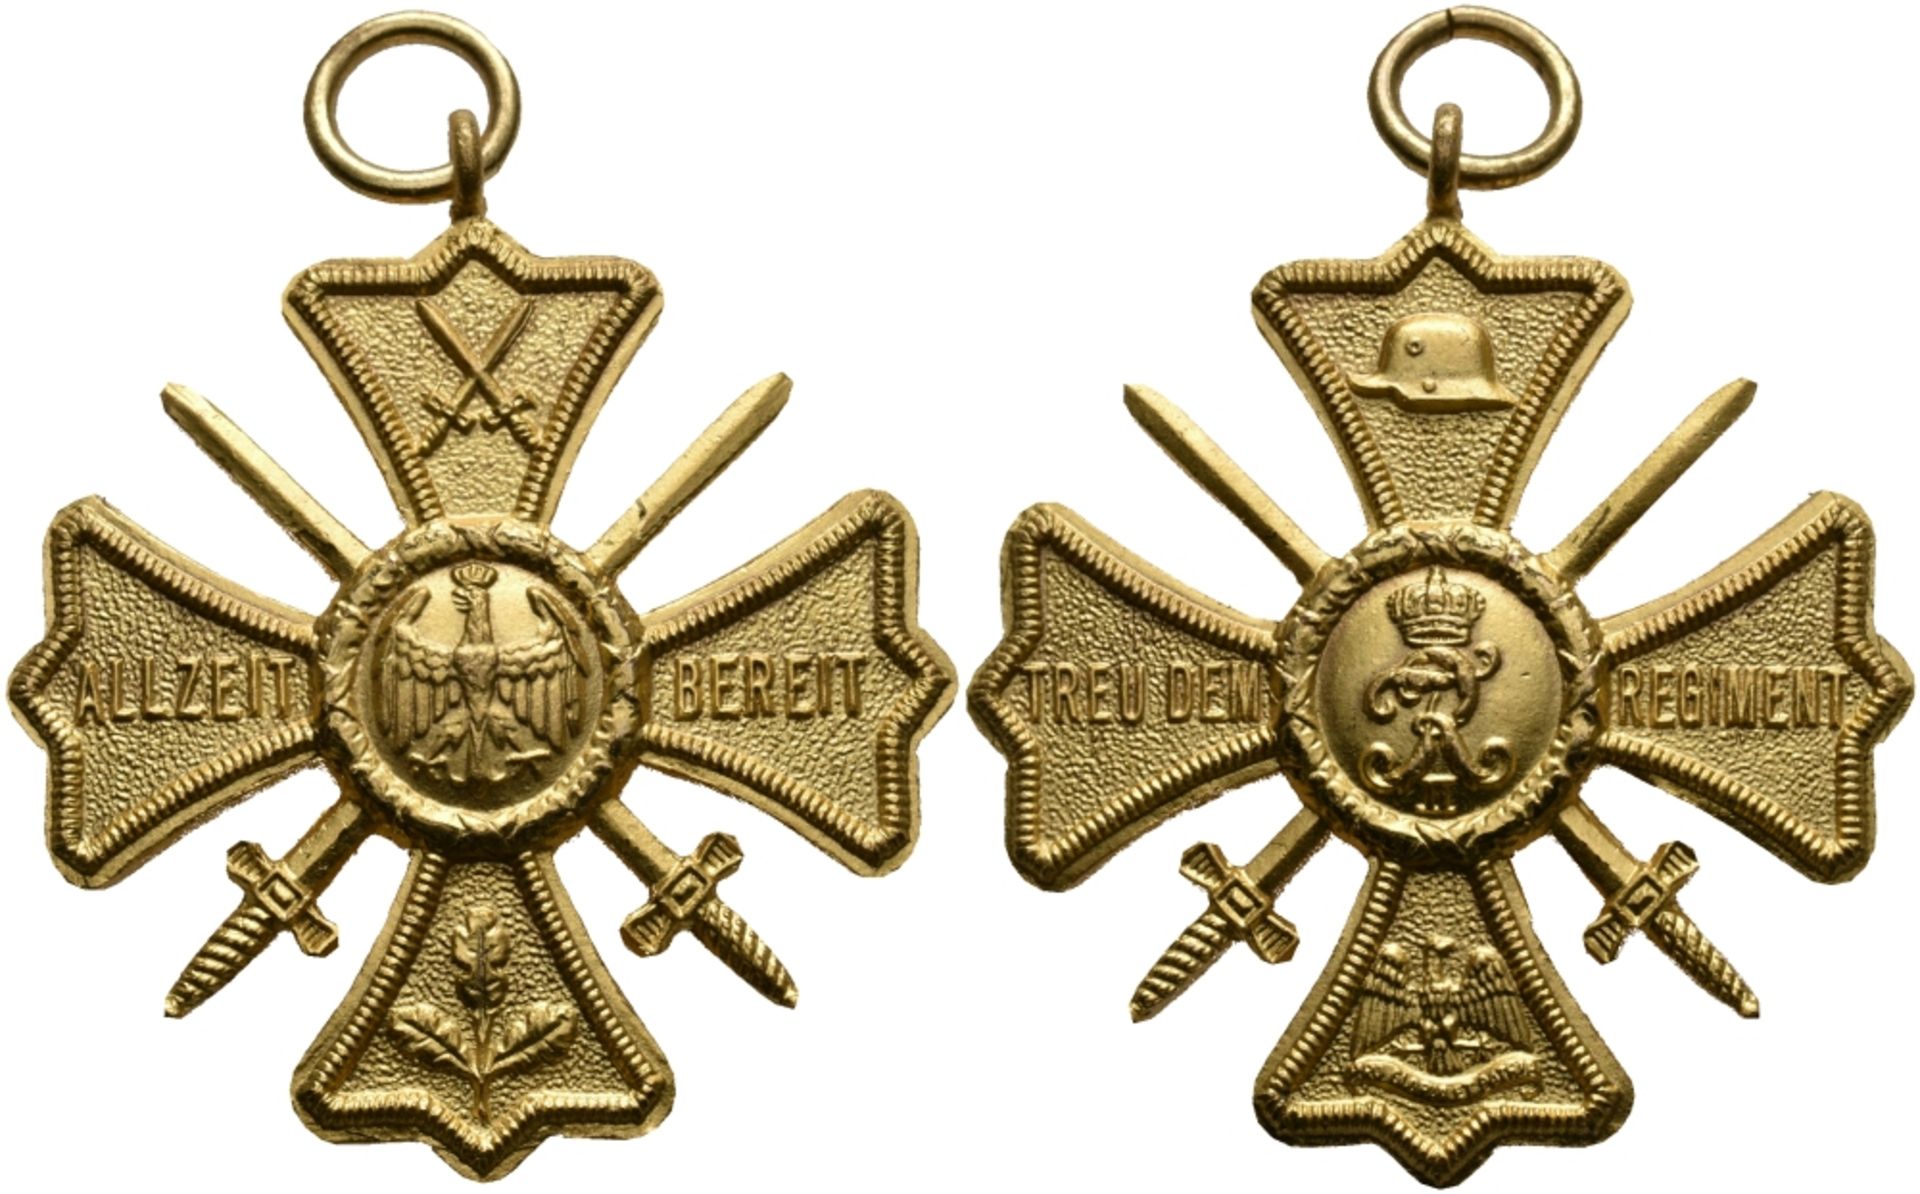 Remembrance cross faithful the regiment with regiment clasp \\R. Field kind. RGT. 33\\ on the